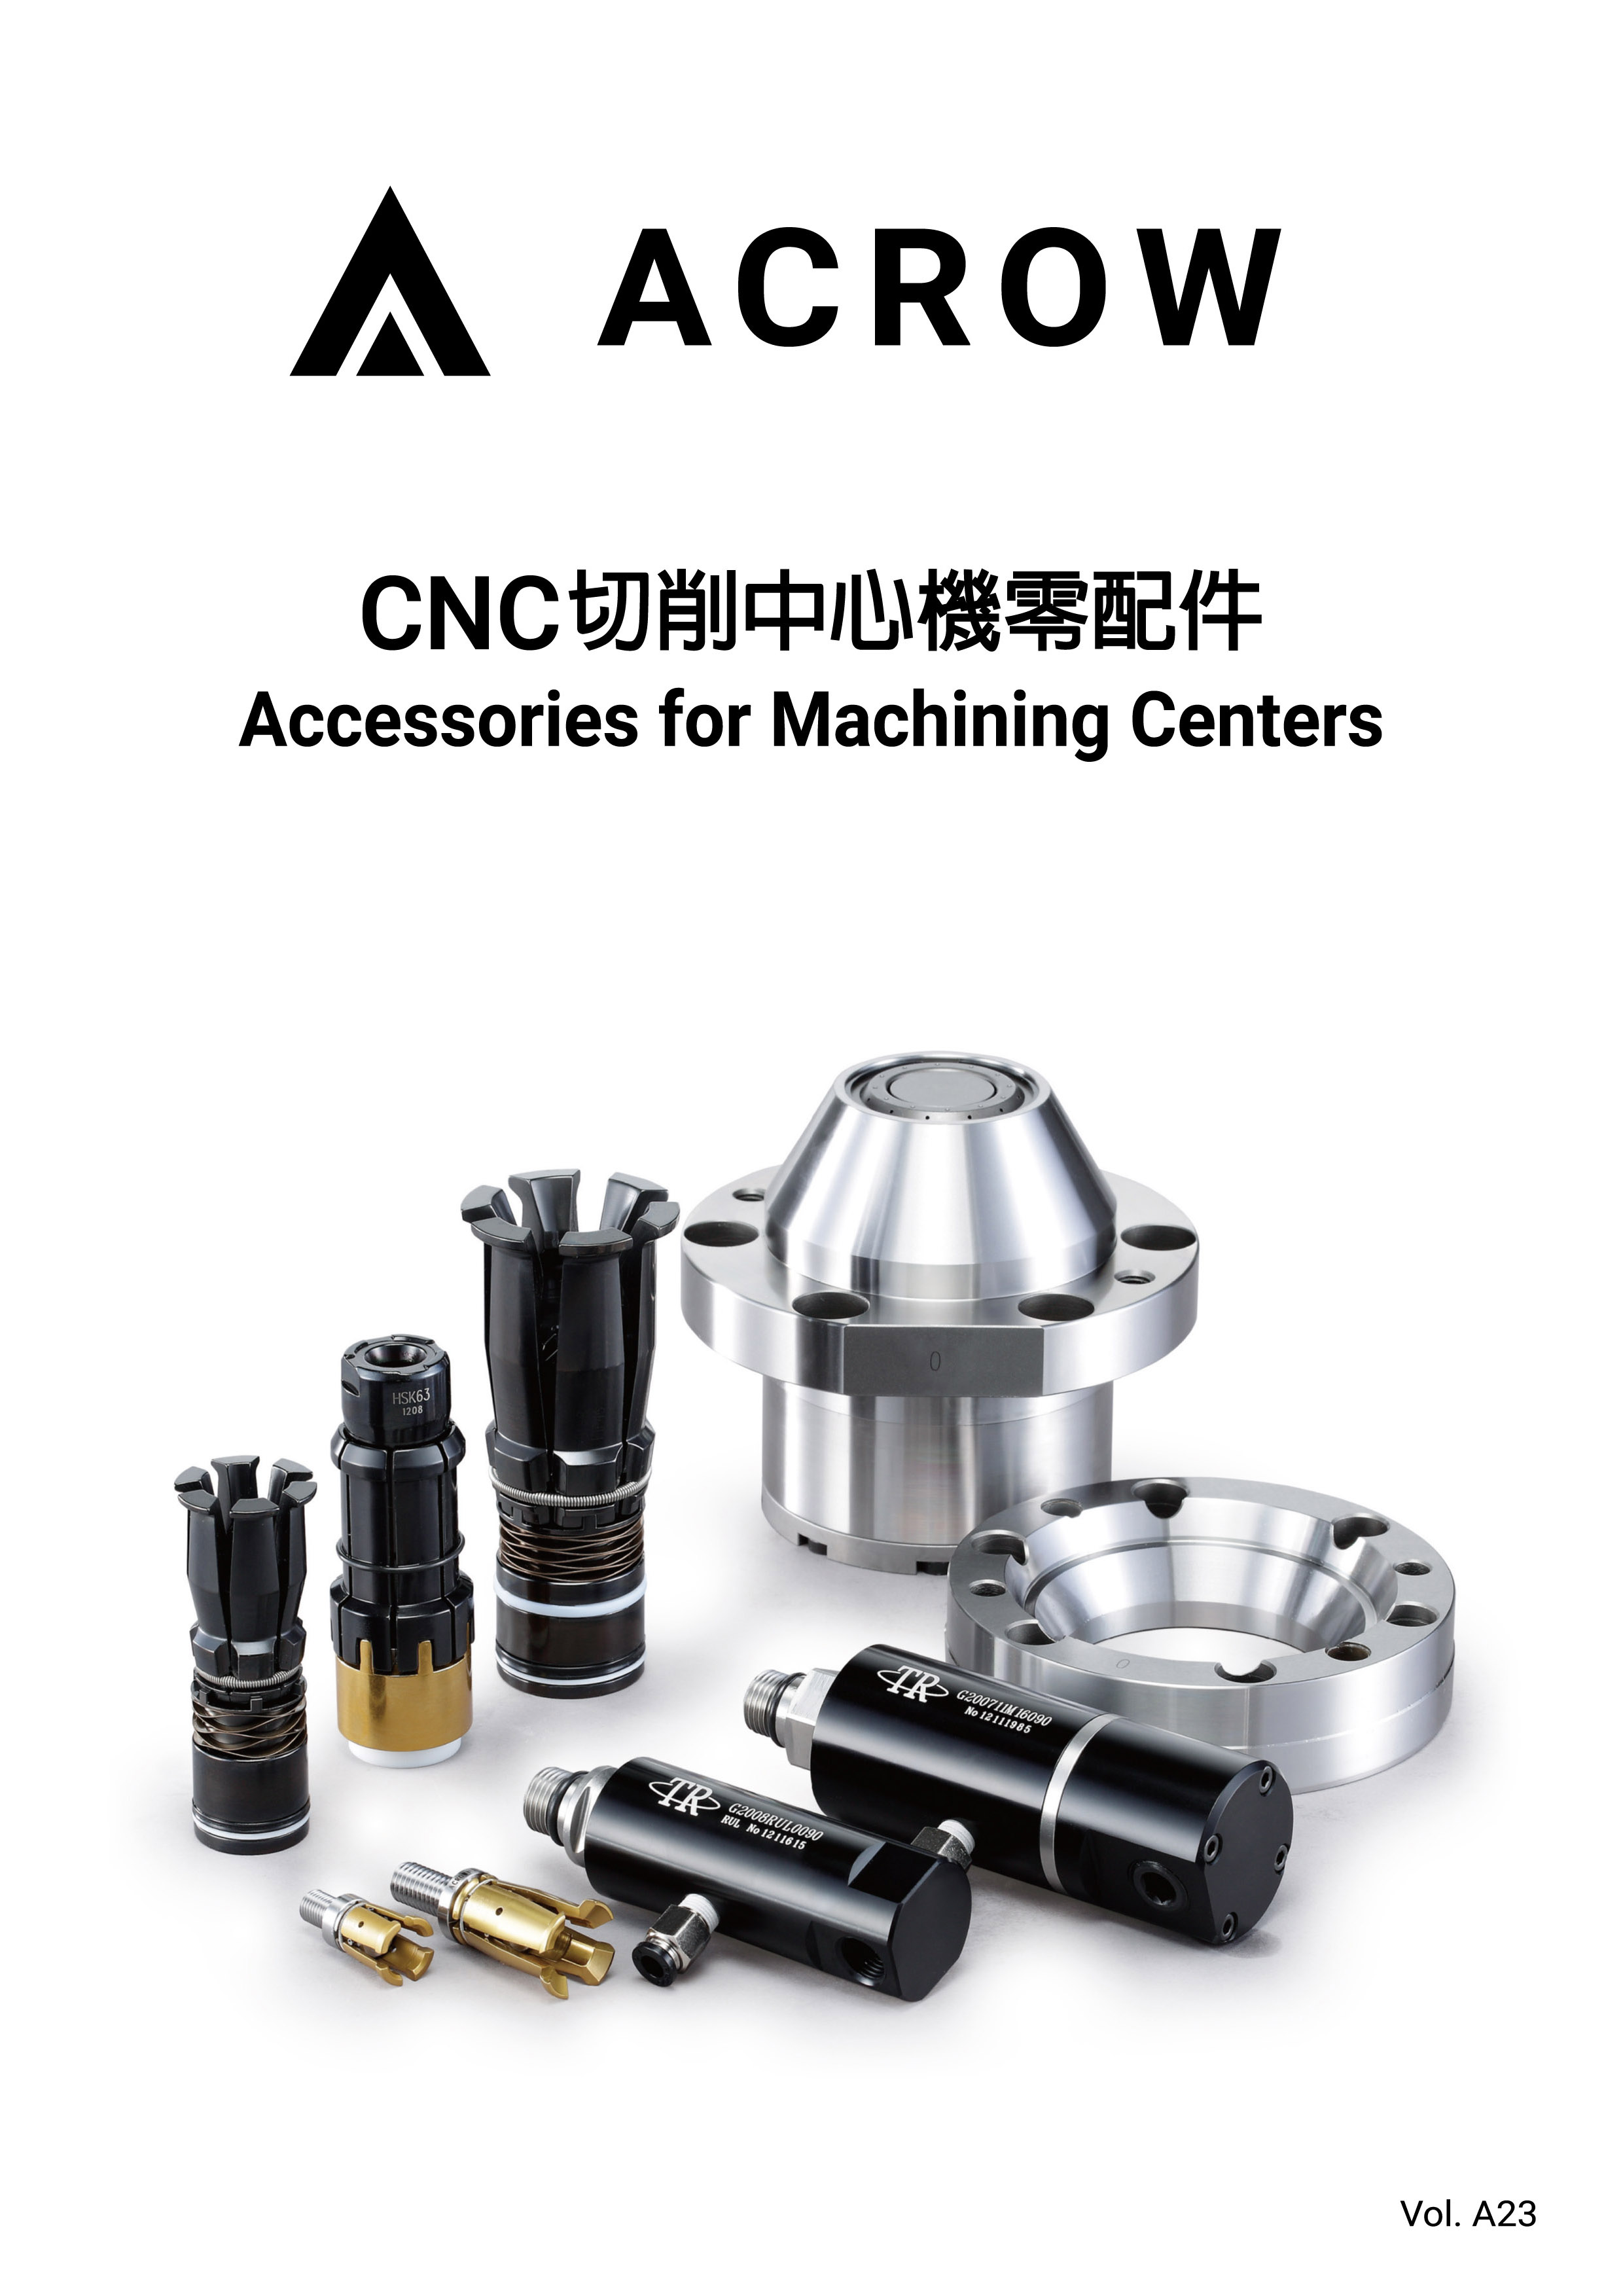 ACROW CNC Accessories for Machining Center